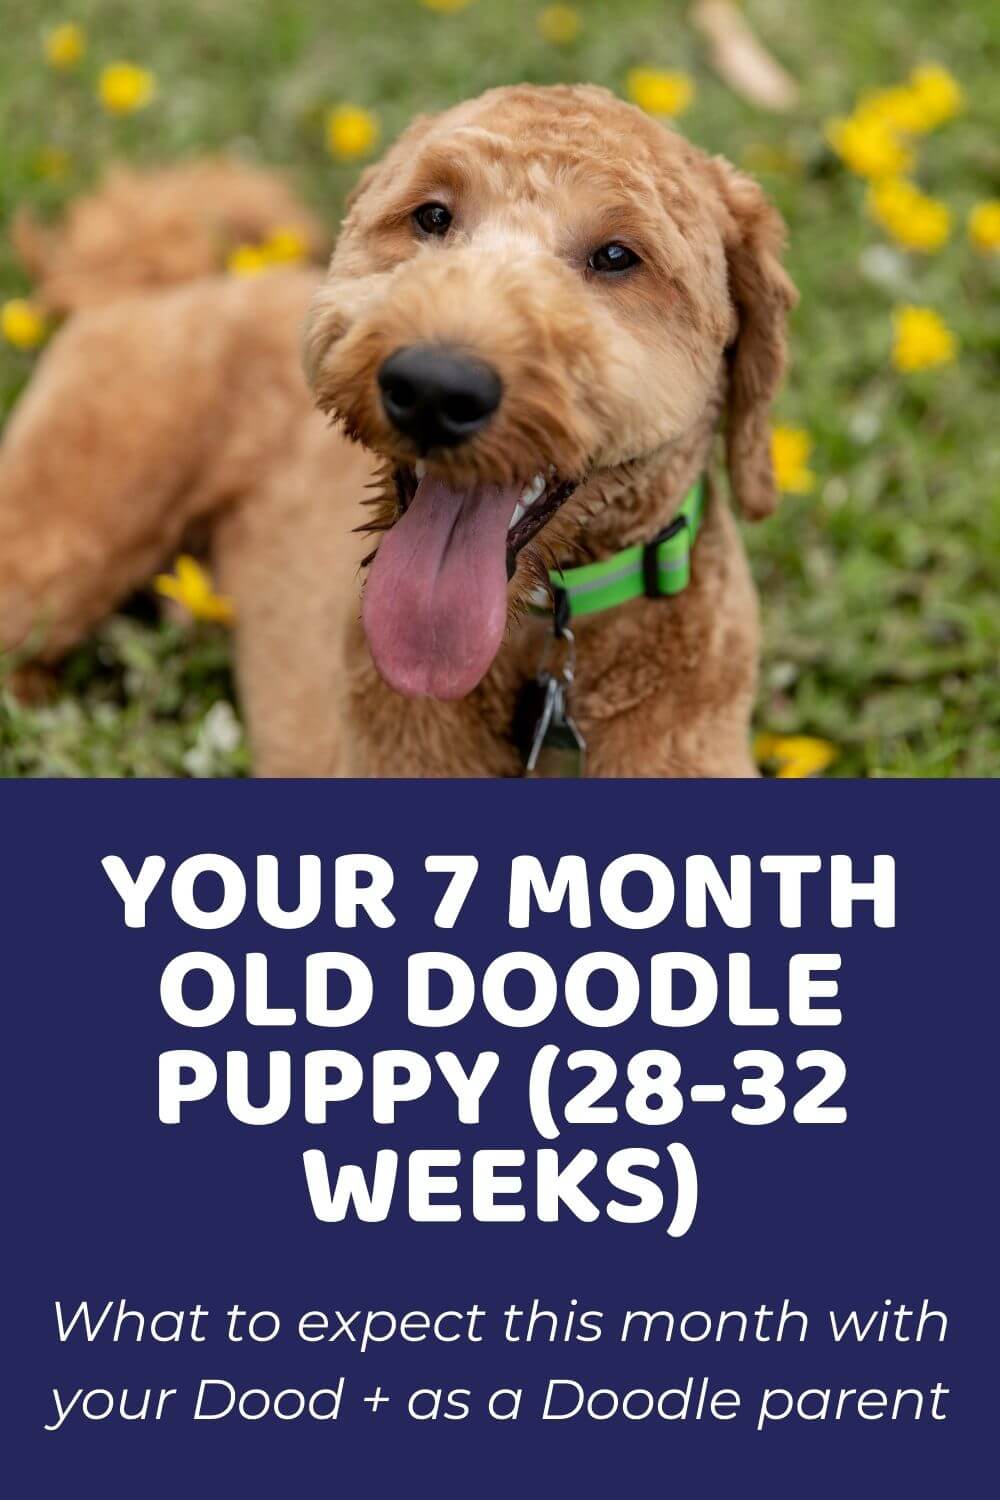 Your 7 Month Old Doodle Puppy (28-32 weeks)